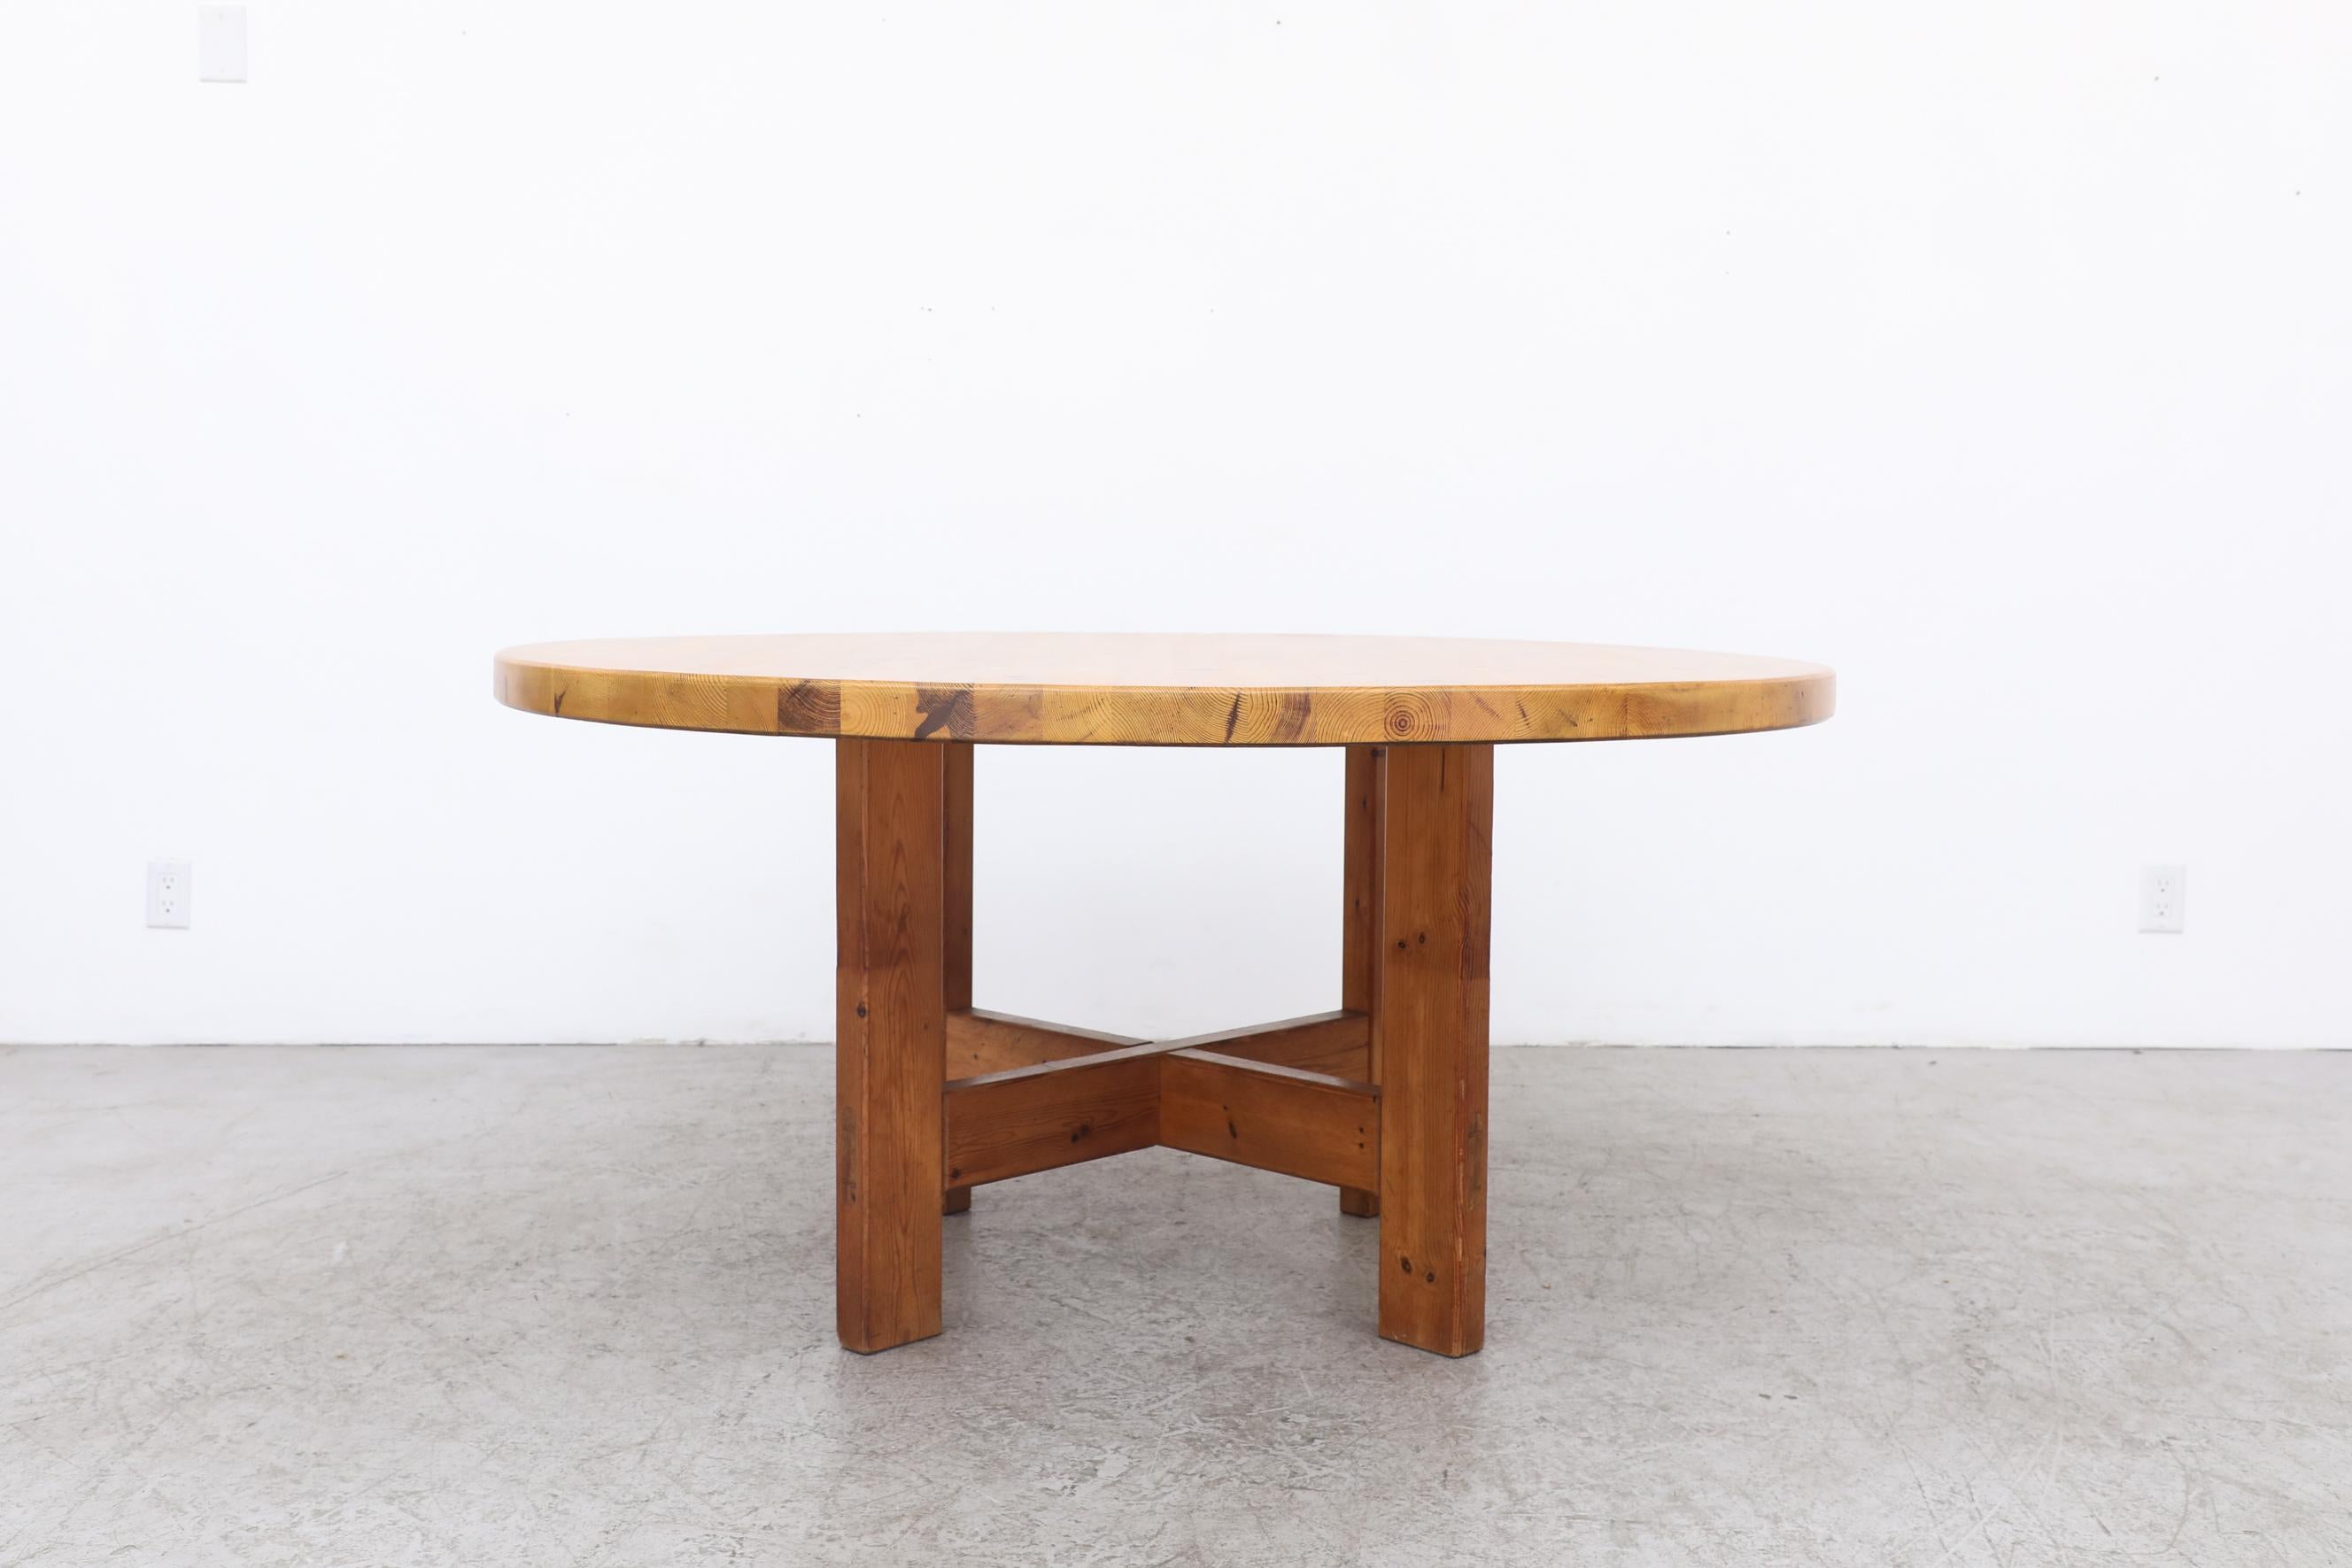 Massive Swedish pine dining table model  'RW152' by Roland Wilhelmsson for Karl Andersson & Söner, 1970's, Sweden. Height from the floor to the underside of the top is 26.25